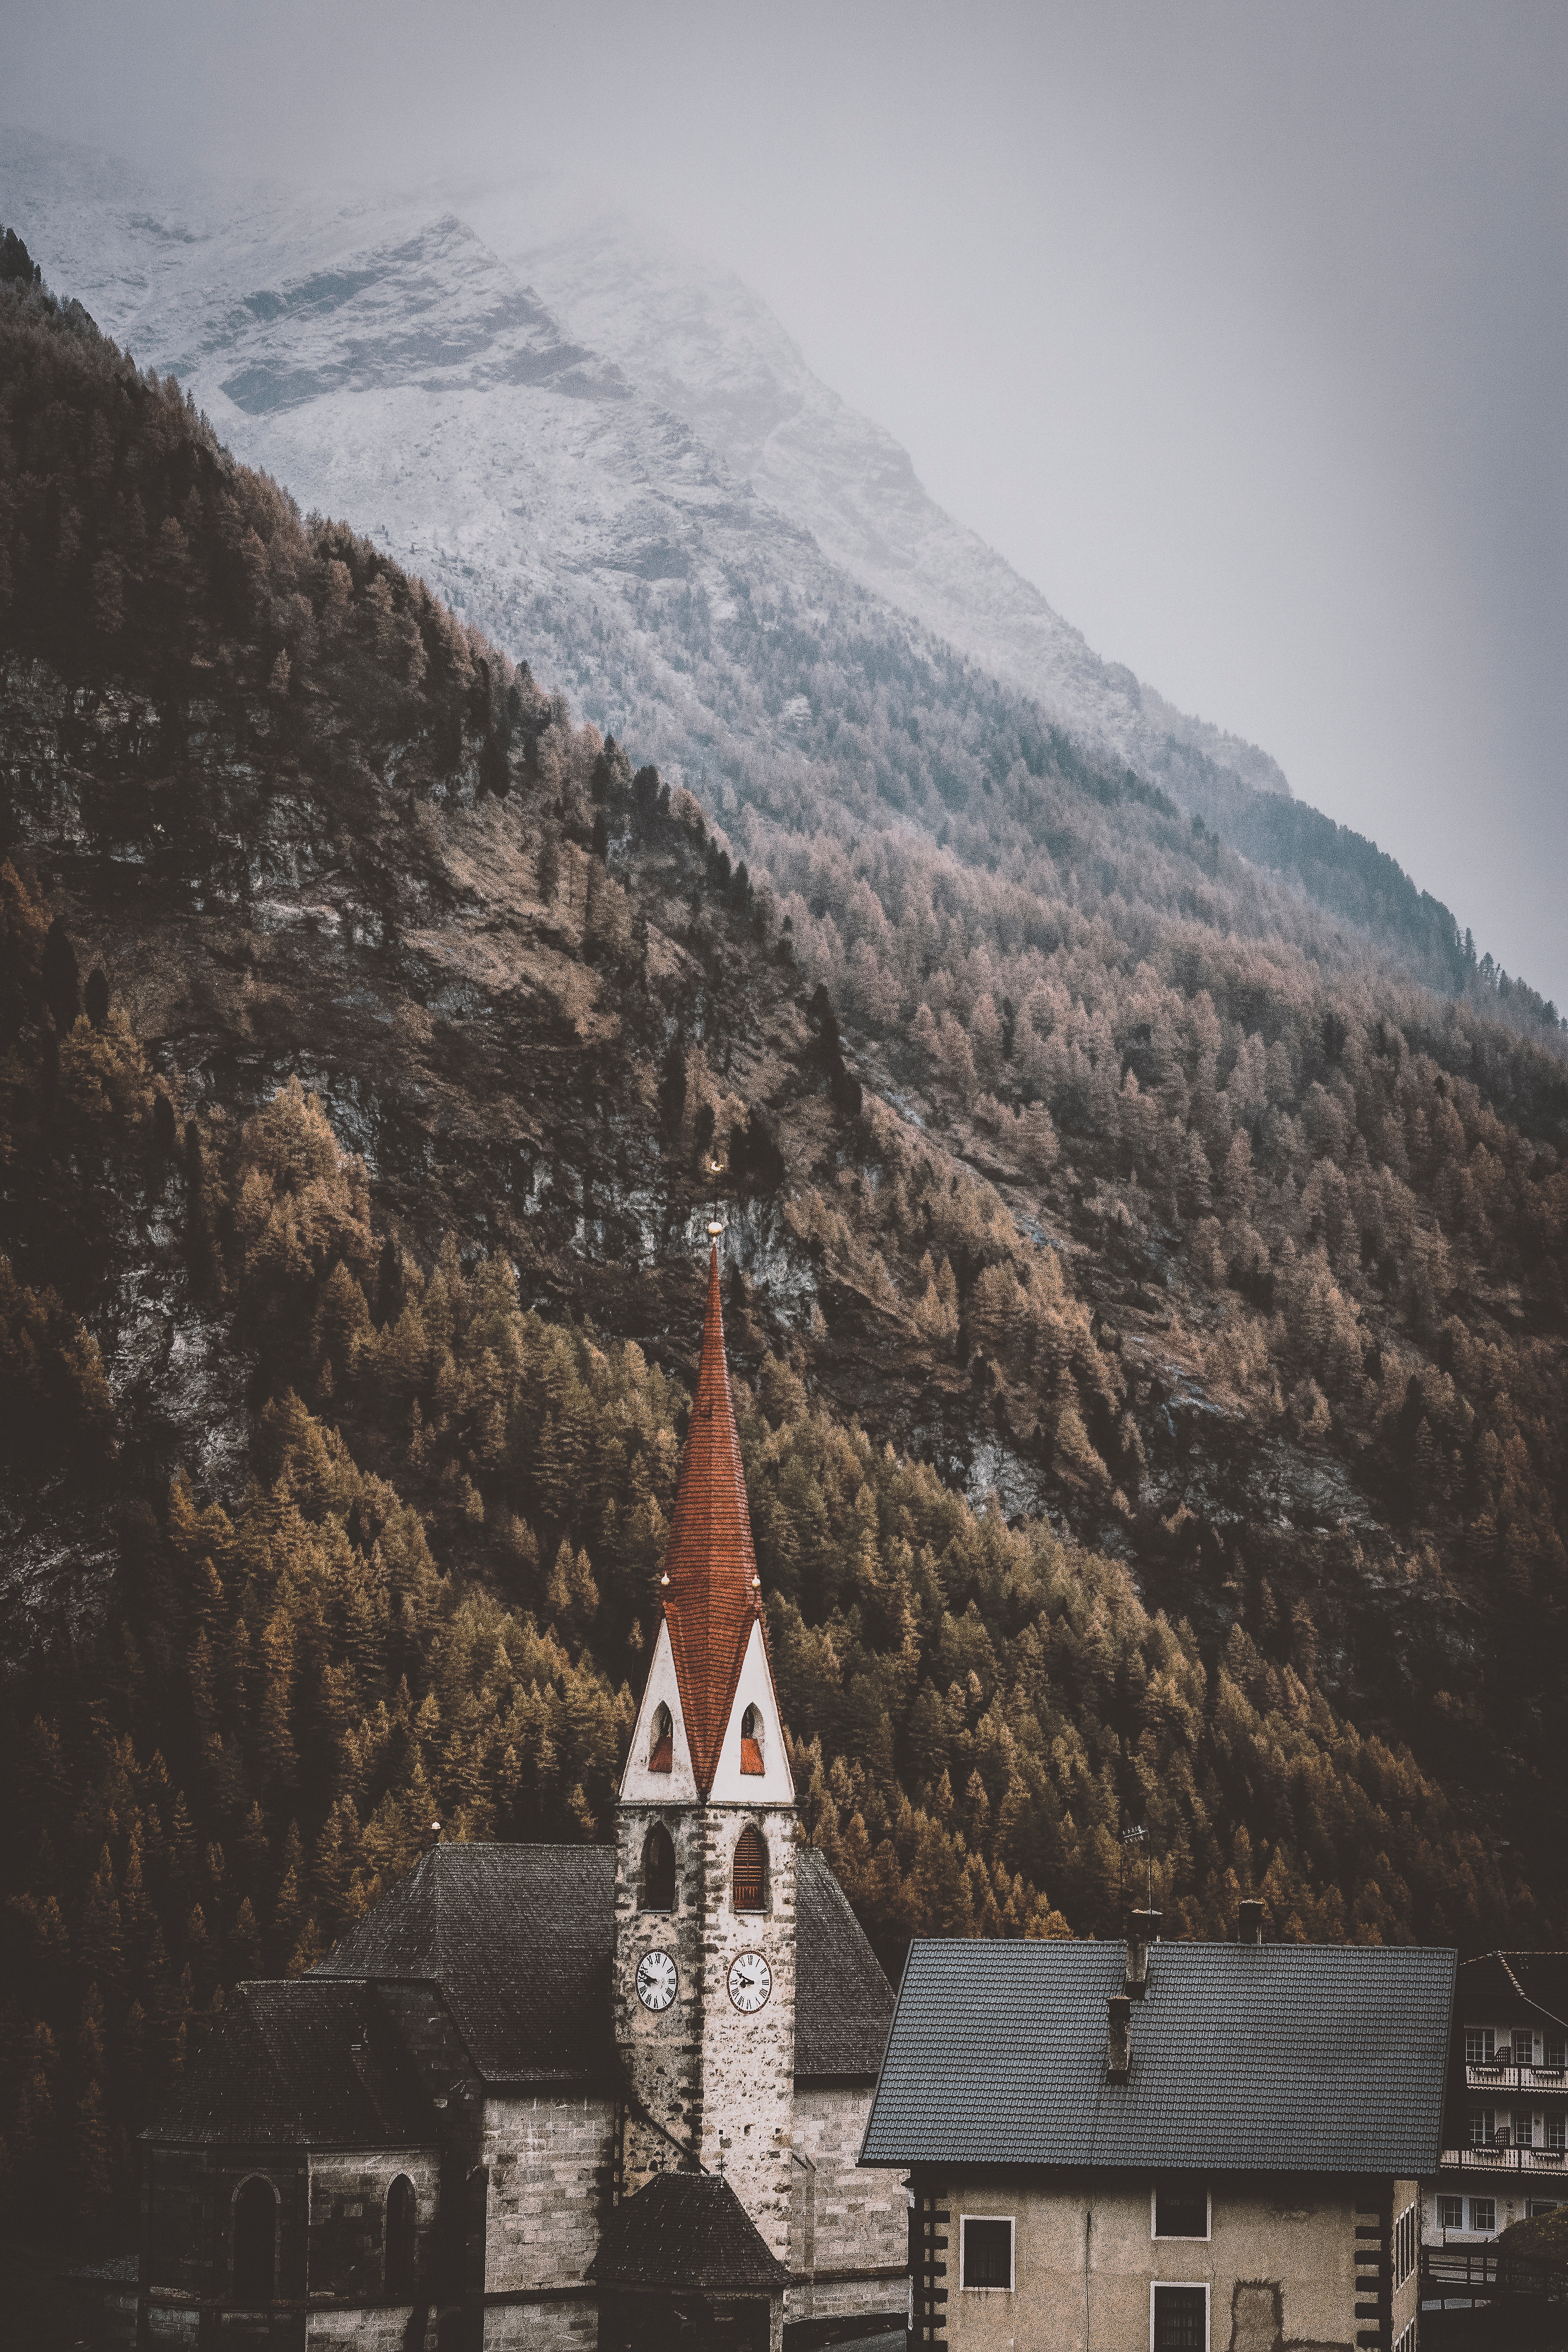 mountains, cities, architecture, building, chapel, spire